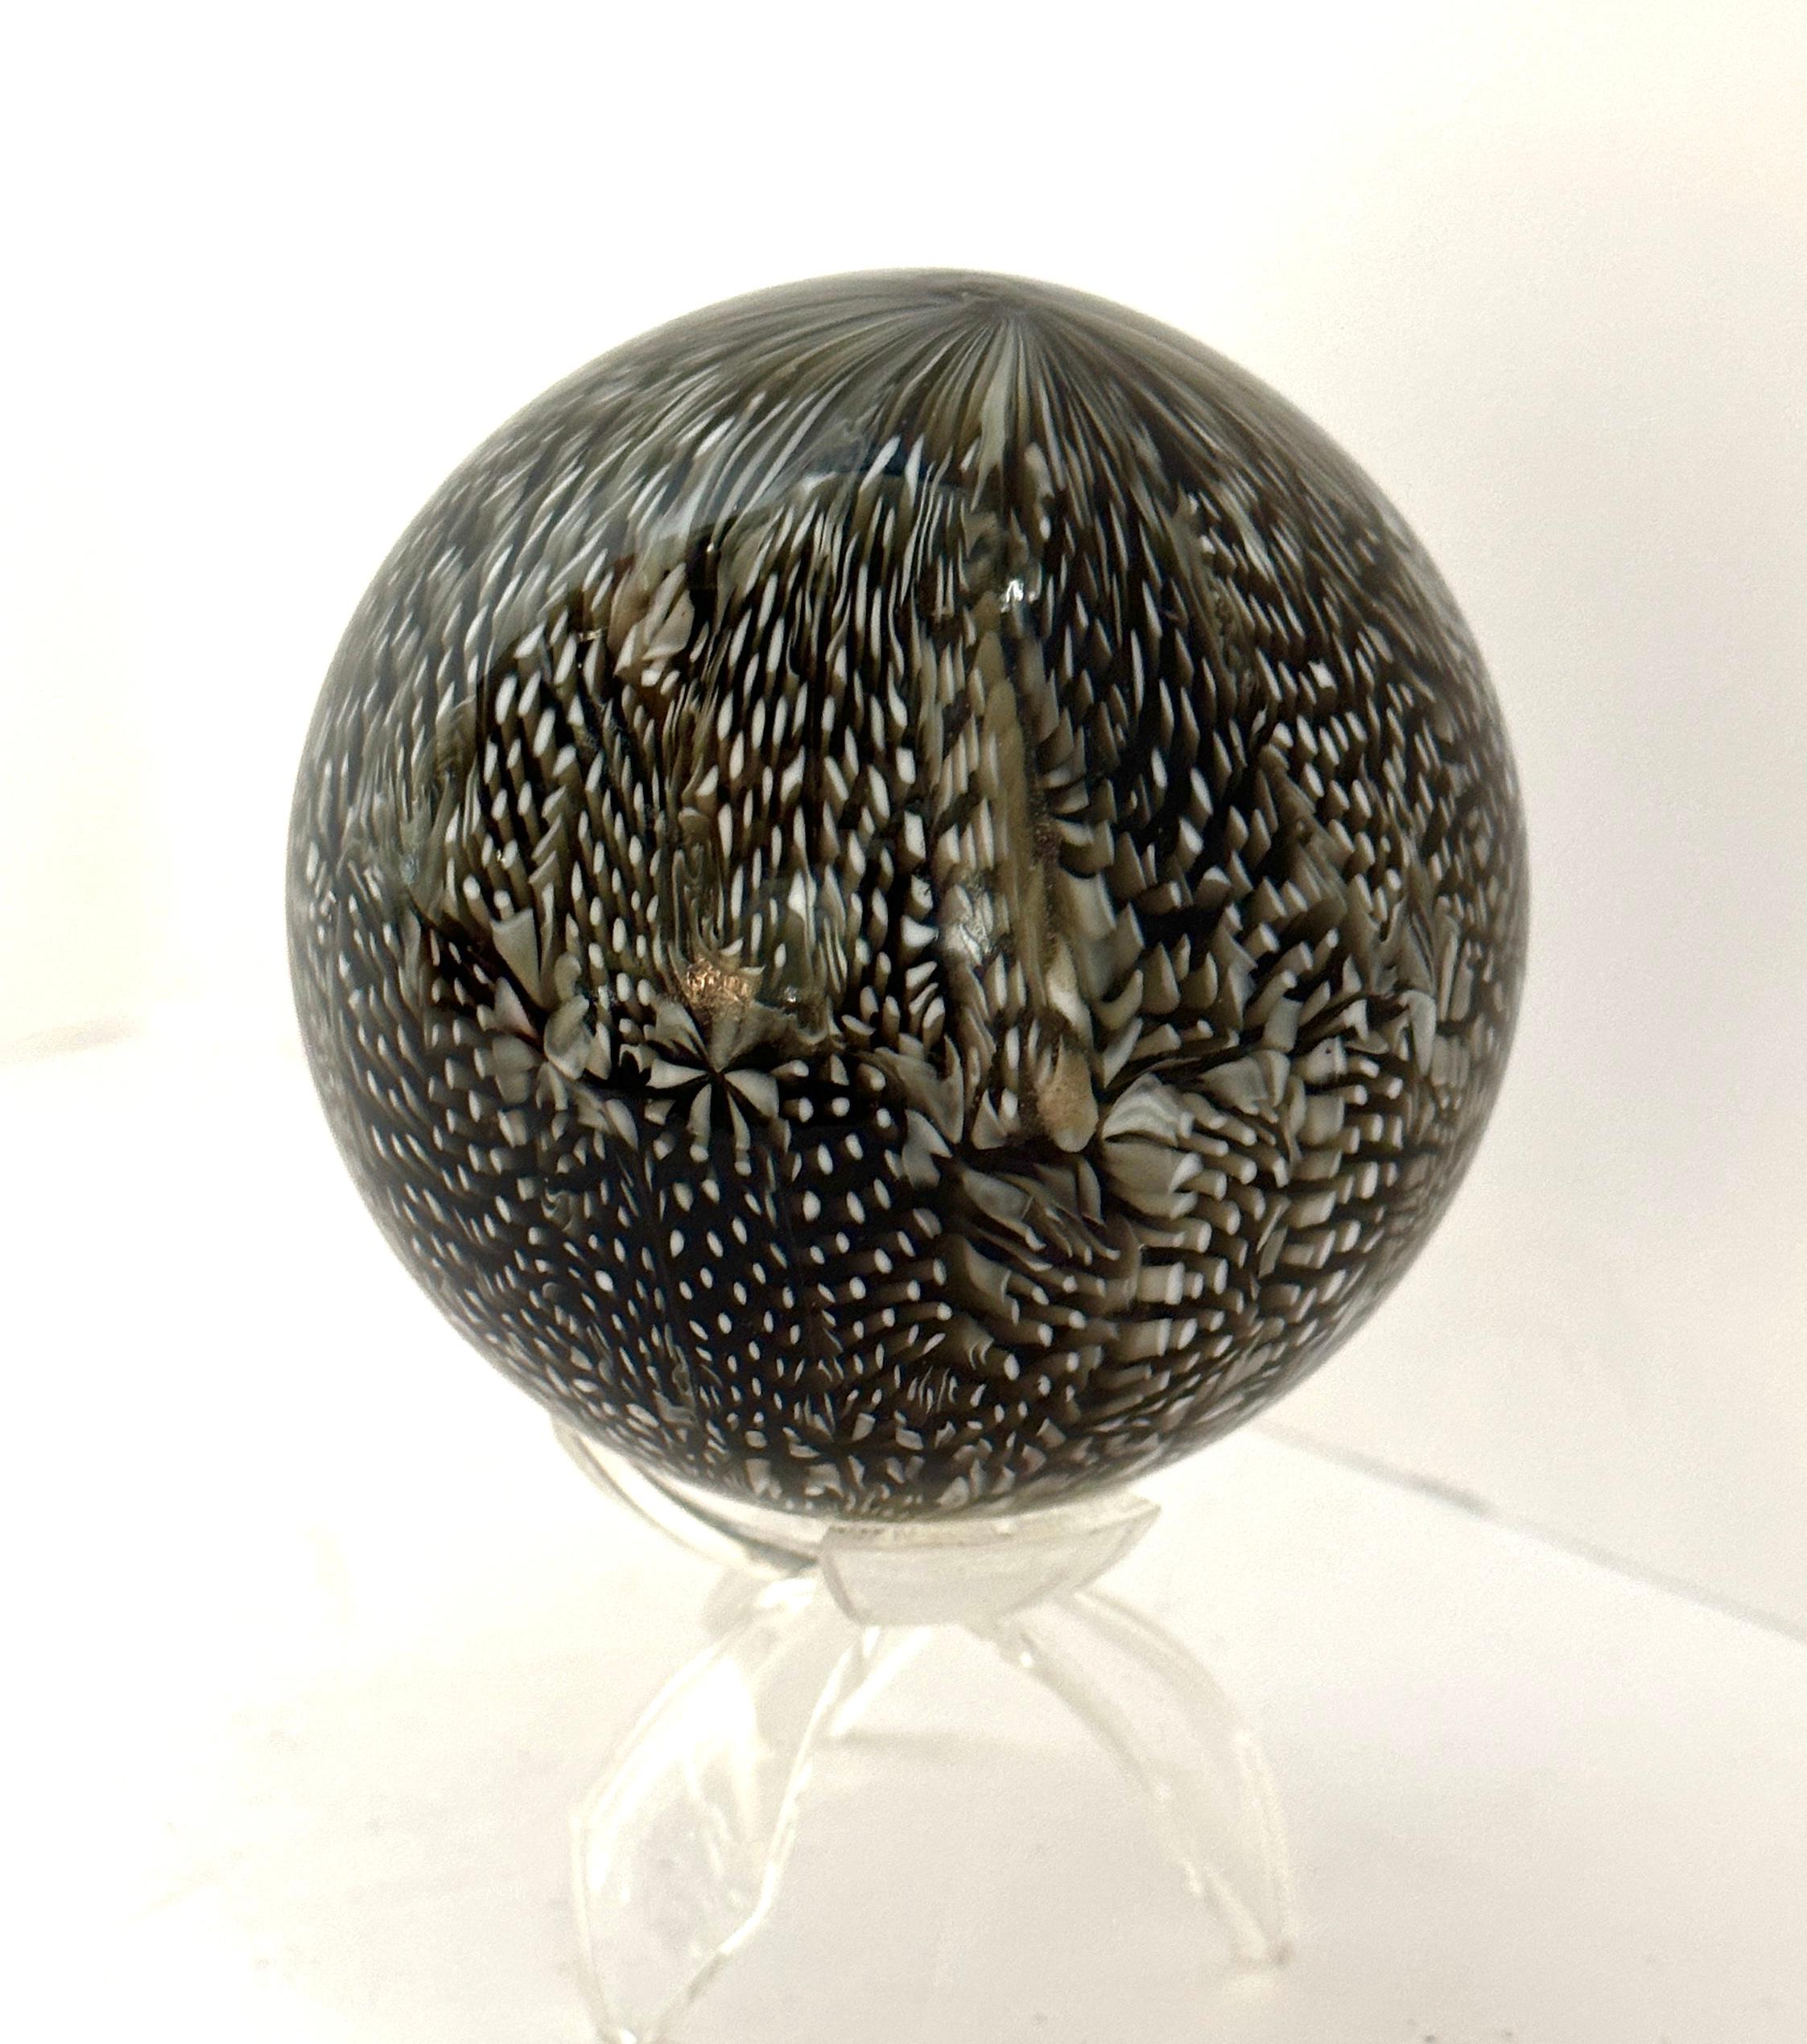 Wonderful Murrine ball by the noted Venini artist Ludovico Diaz de Santillana. It dates from the 1960’s and is signed on the bottom Venini Italia. Lovely shades of brown and white. In good condition with no chips or cracks. Ludovico was married to